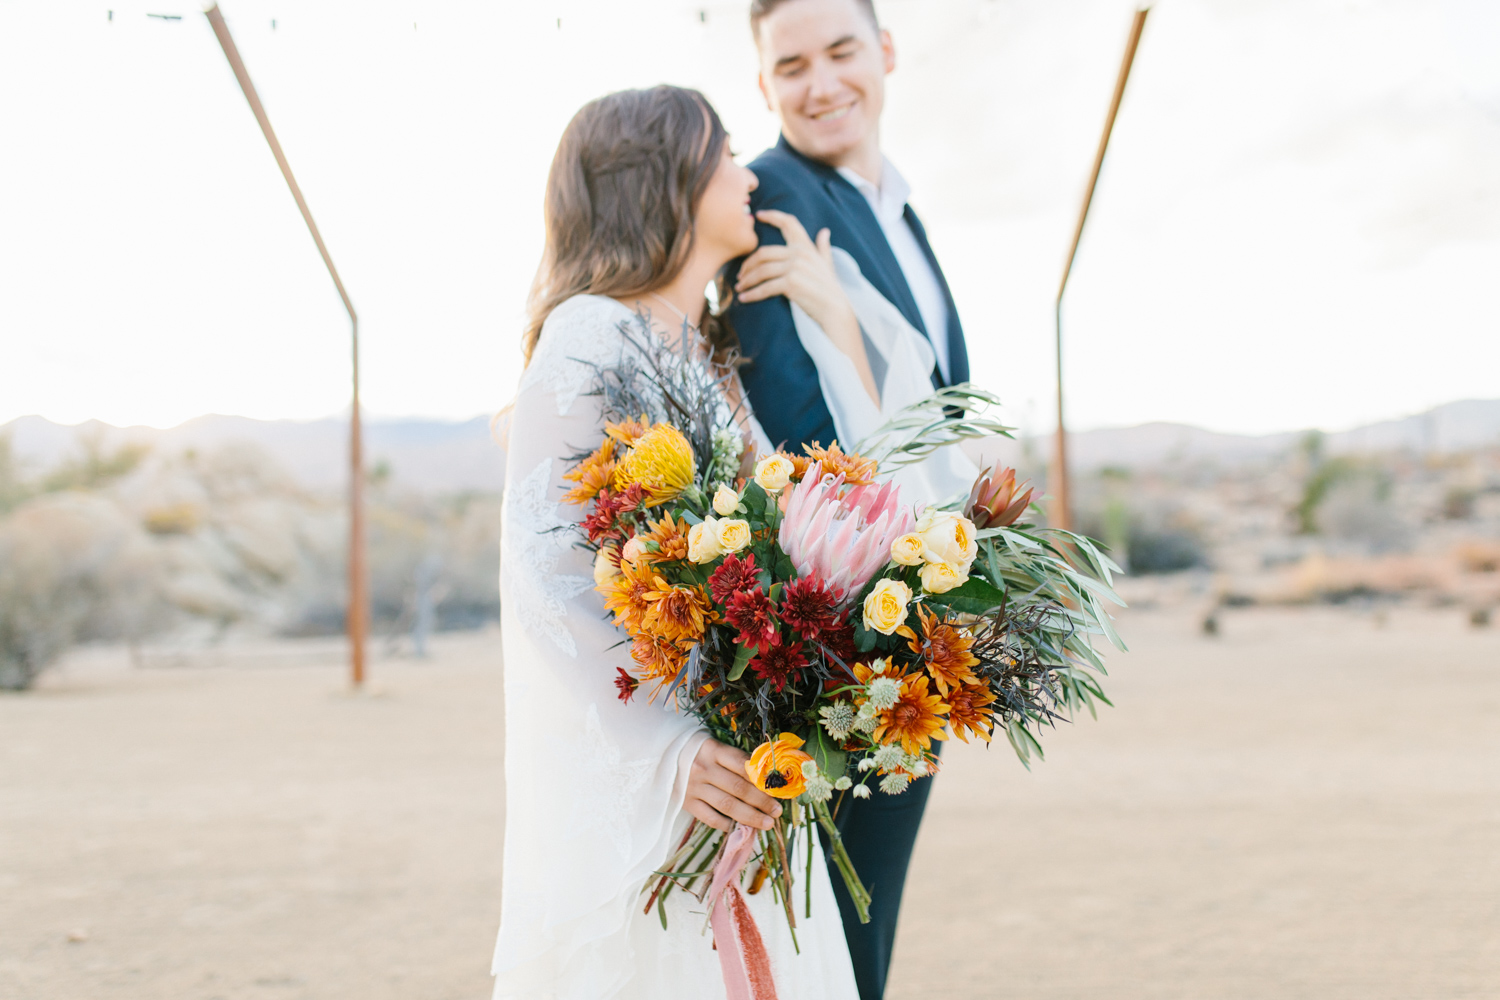 The Ruin Venue California | California Bride Inspiration | Fall Styled Shoot in the Desert | Epic Styled Shoot | Southern California Wedding Photographer | The Dress Theory | Fall Desert Wedding